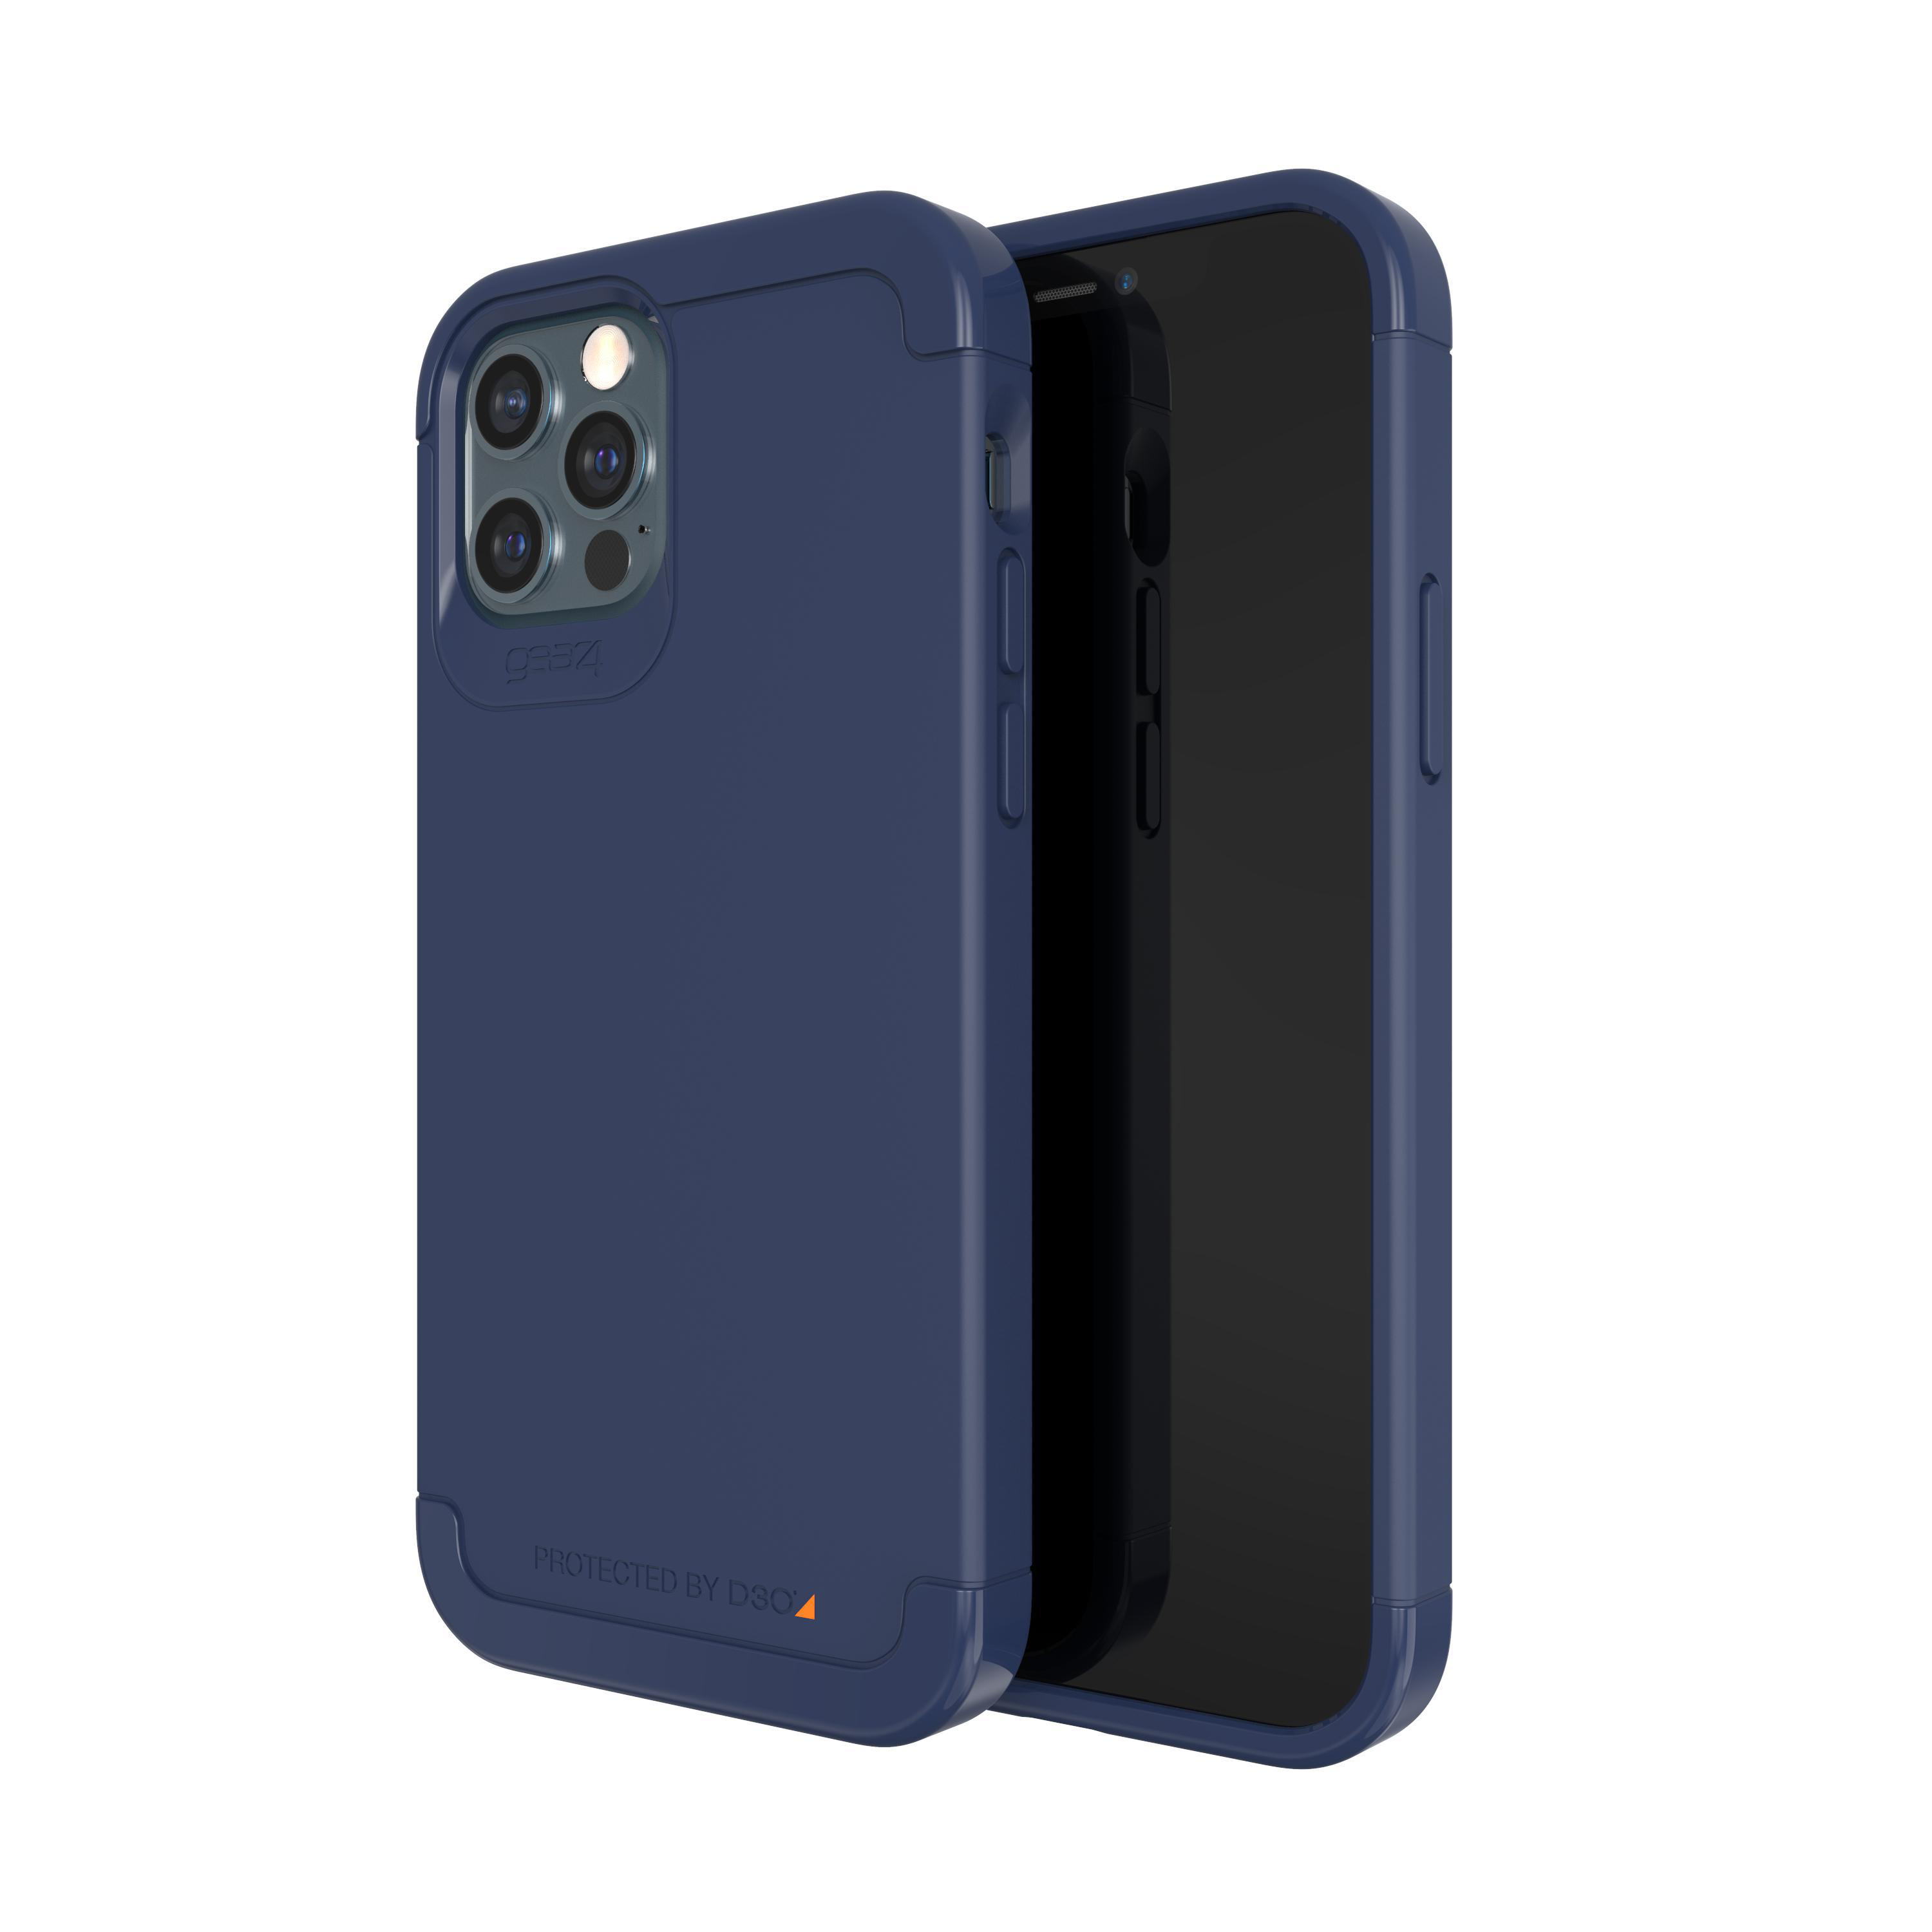 GEAR4 D3O Wembley Navy Apple, 12/12 blue Pro, Palette, iPhone Backcover